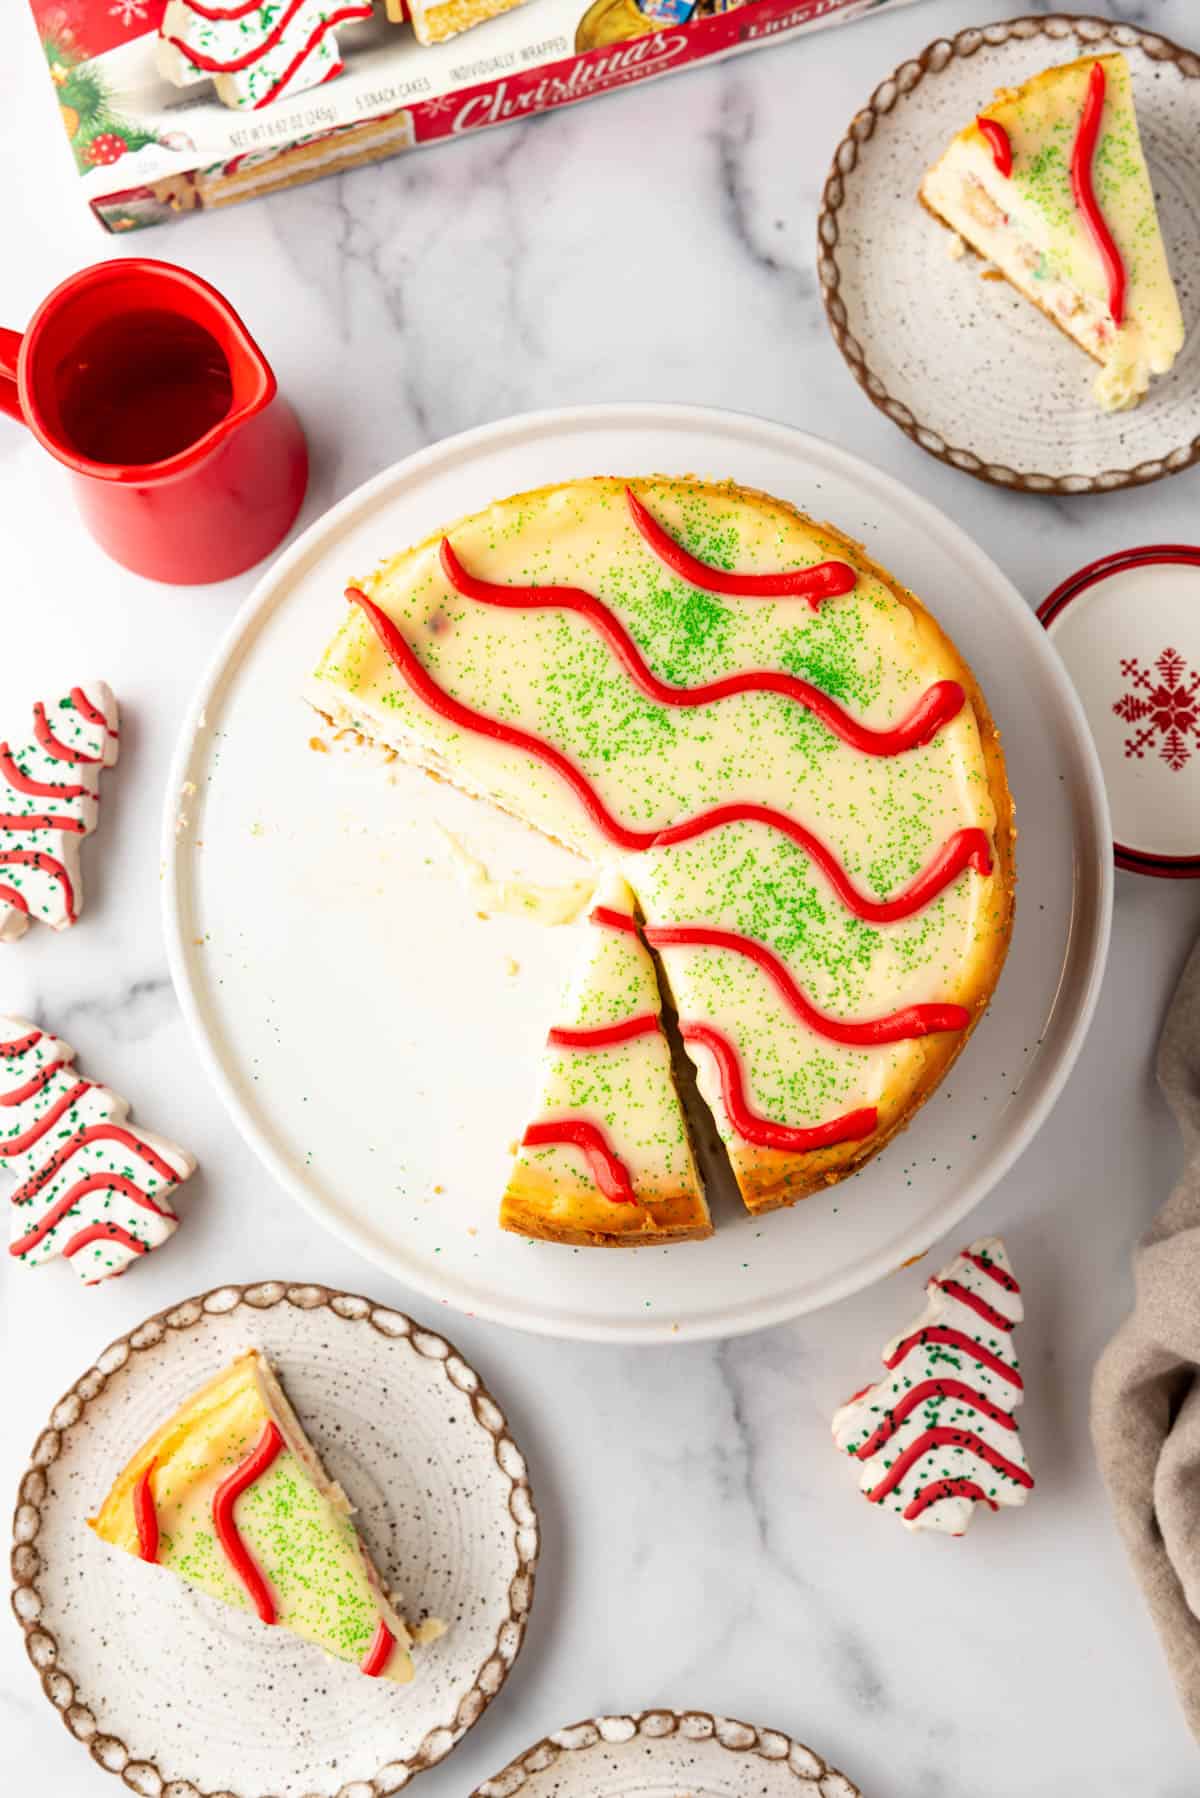 An overhead image of a Little Debbie Christmas Tree Cheesecake with some slices taken out of it.